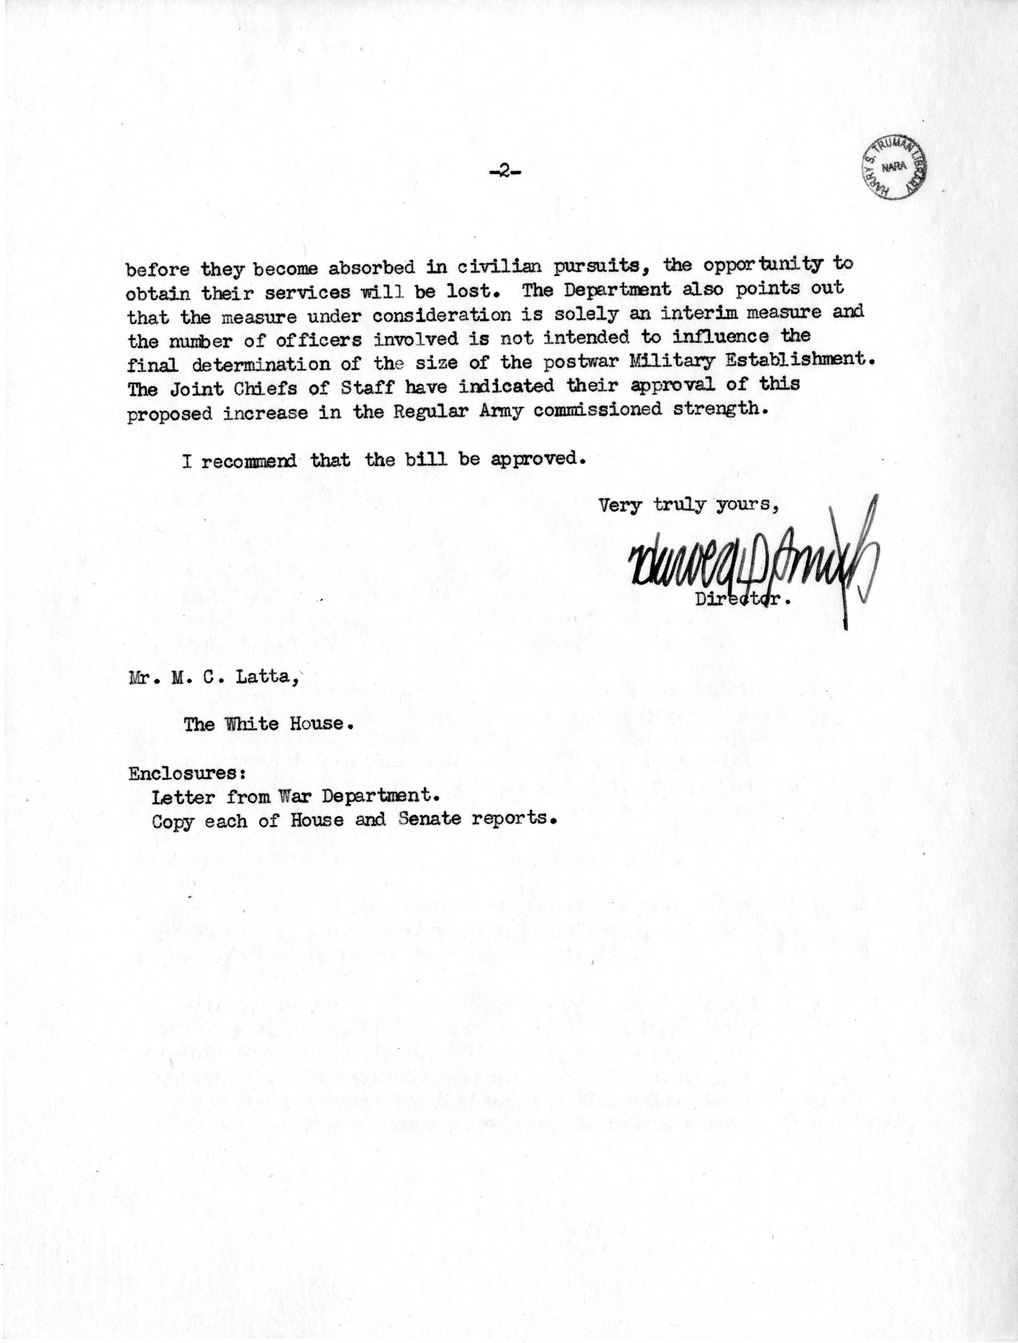 Memorandum from Harold D. Smith to M. C. Latta, H.R. 4587, To Provide for the Appointment of Additional Commissioned Officers in the Regular Army, with Attachments